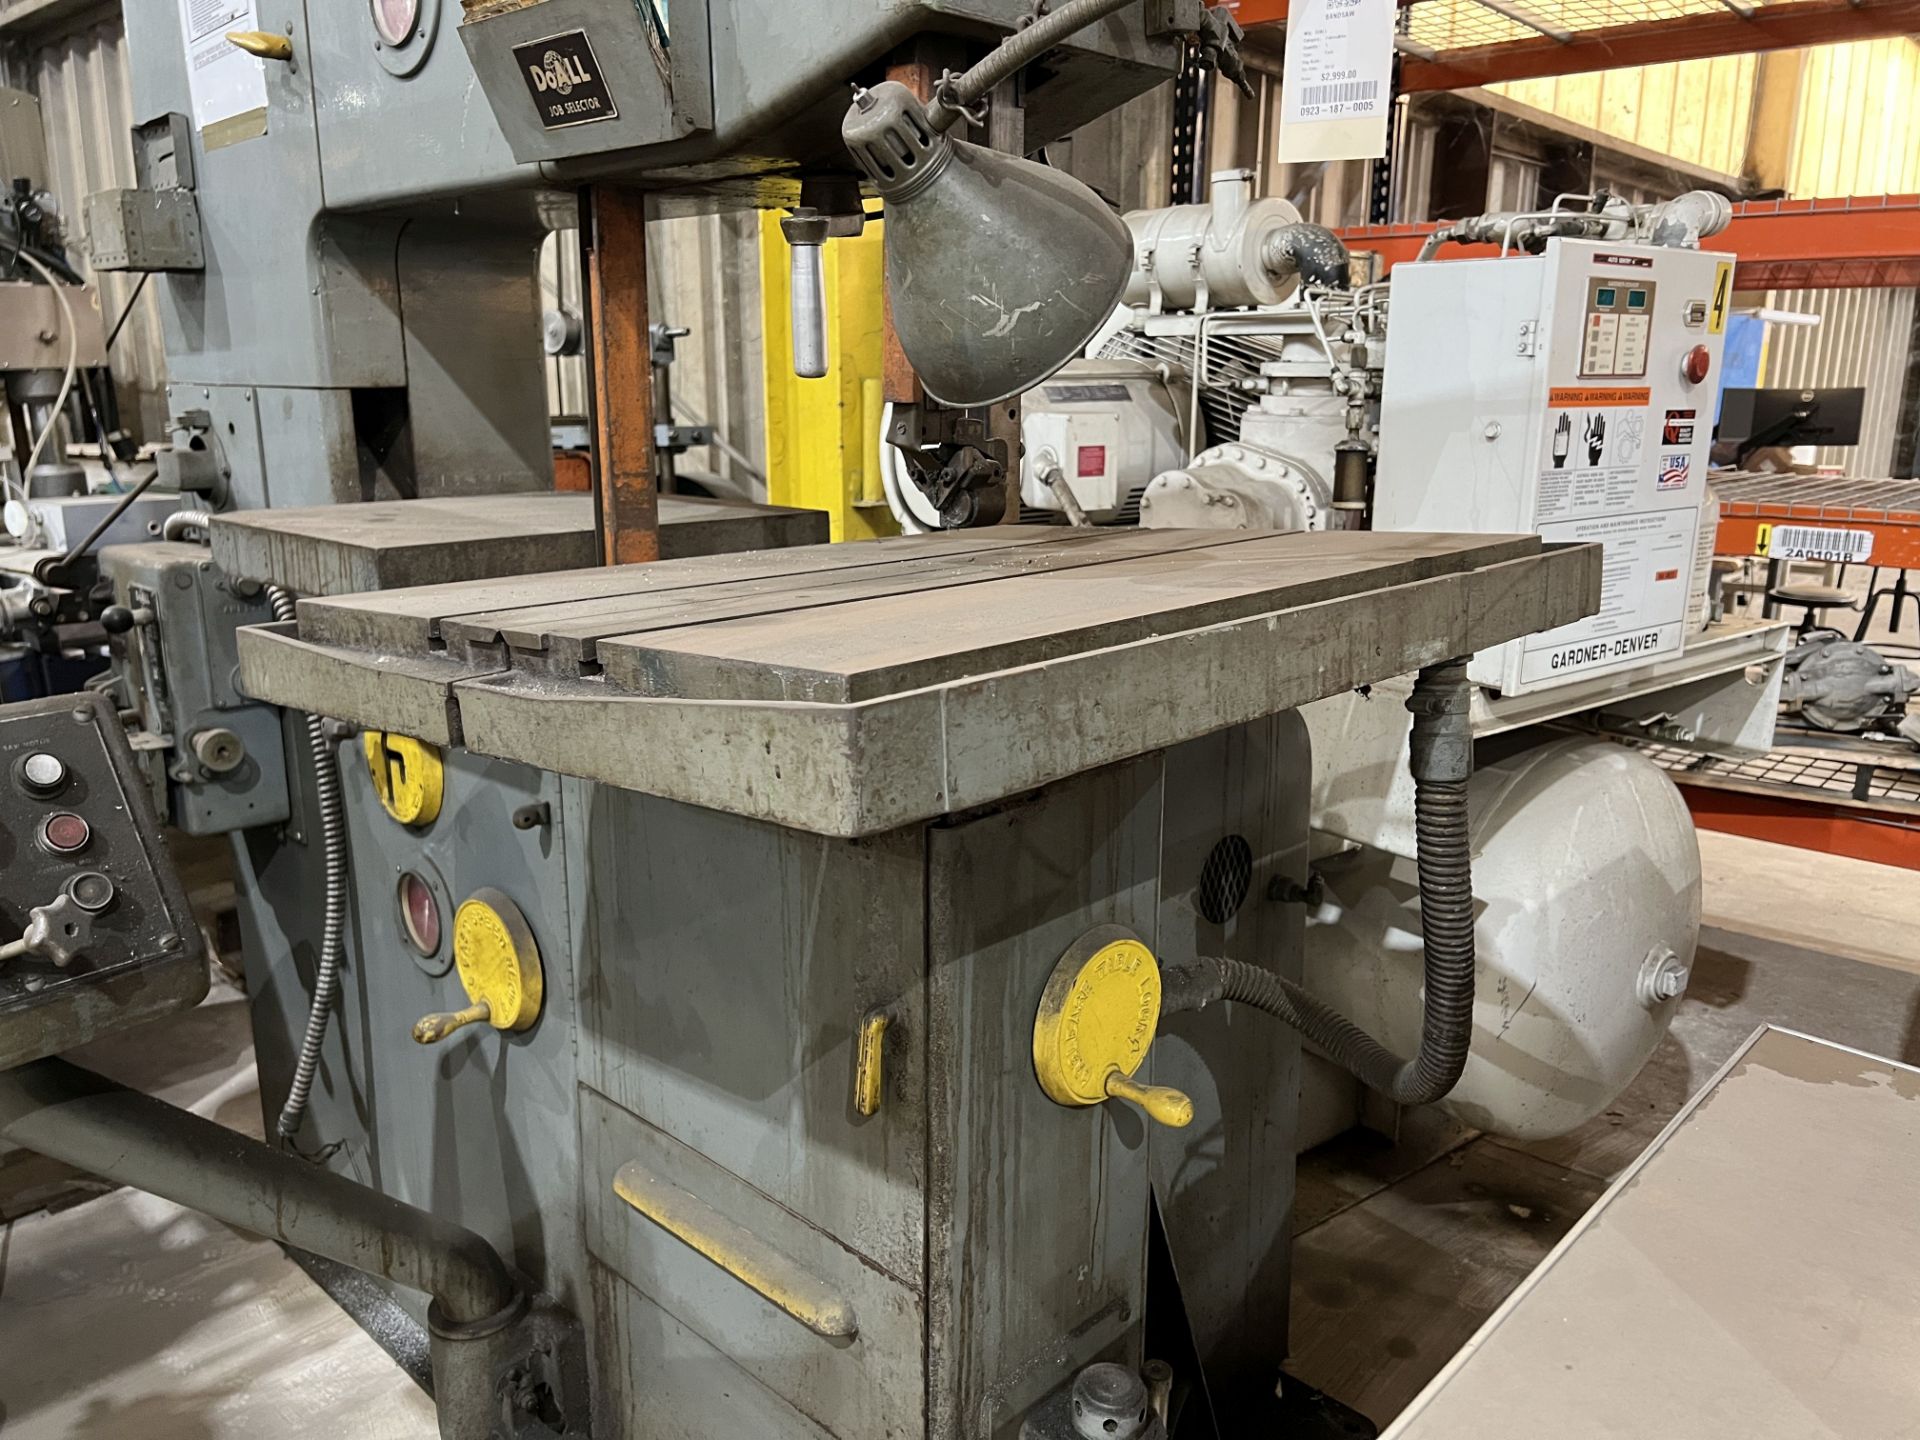 DOALL BANDSAW, Model 3612-3. , Date: n/a; s/n 153-691067, Approx. Capacity: 16", Power: n/a, - Image 27 of 29